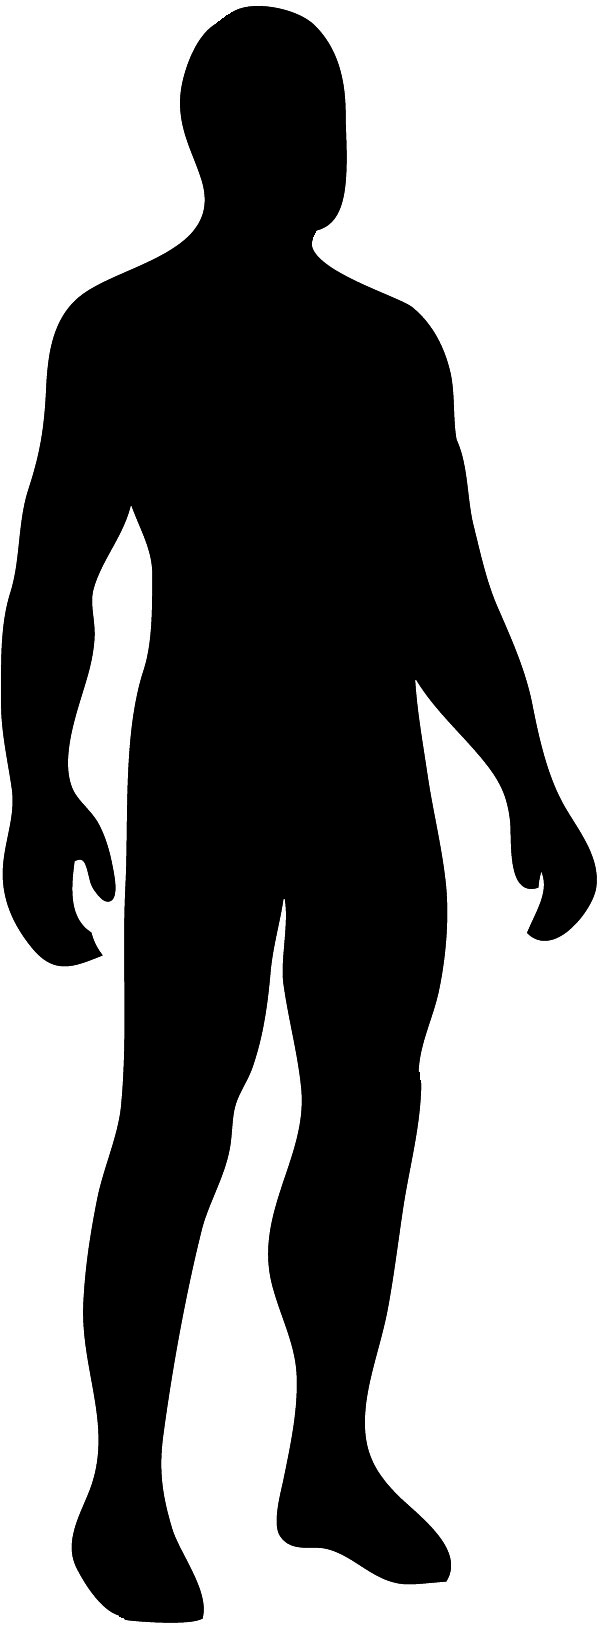 Body Outline Clip Art - Human Body Outline, Transparent background PNG HD thumbnail